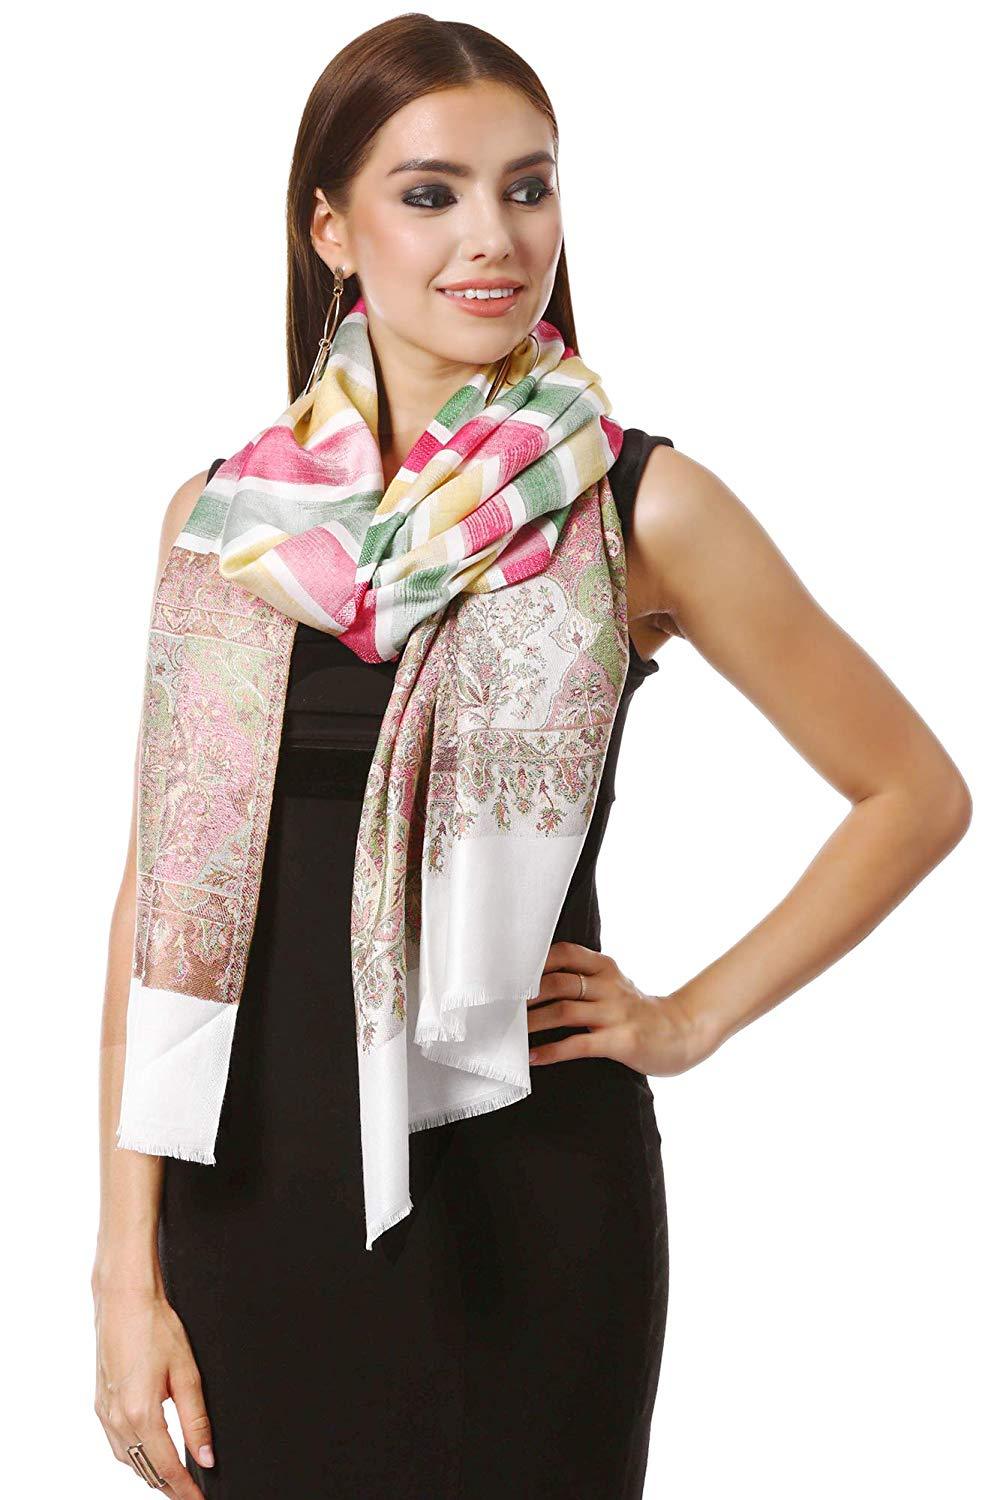 Pashtush Women'S Aztec Design, Soft Bamboo Scarf, Casual Shawls, Stoles, Wraps, Aztec Collection (Soft Bamboo)